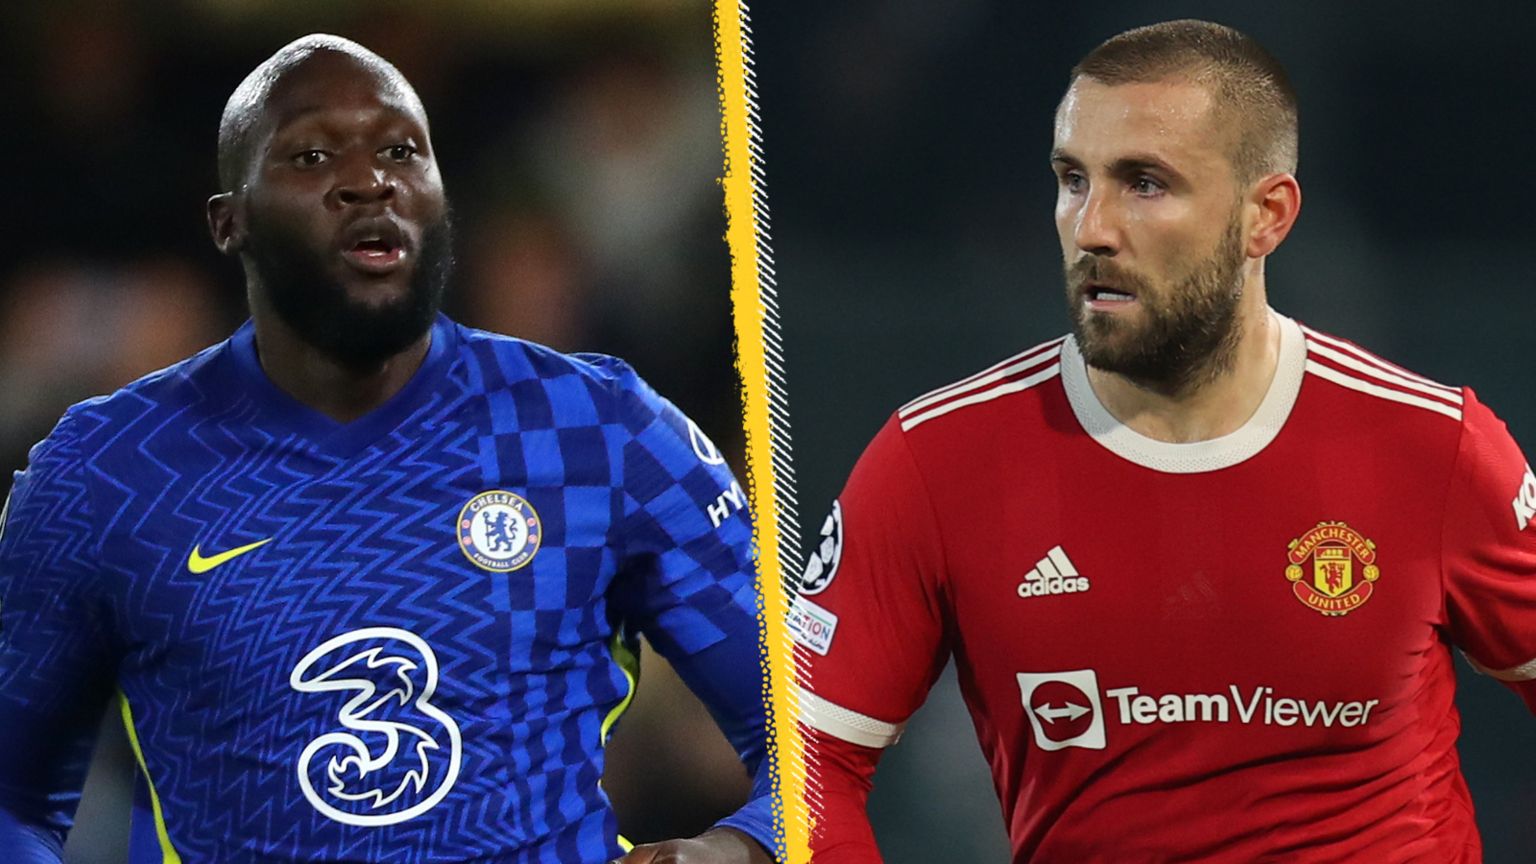 Chelsea striker Romelu Lukaku could be fit to feature against his former club Manchester United but Red Devils full-back Luke Shaw is a doubt with a head injury.